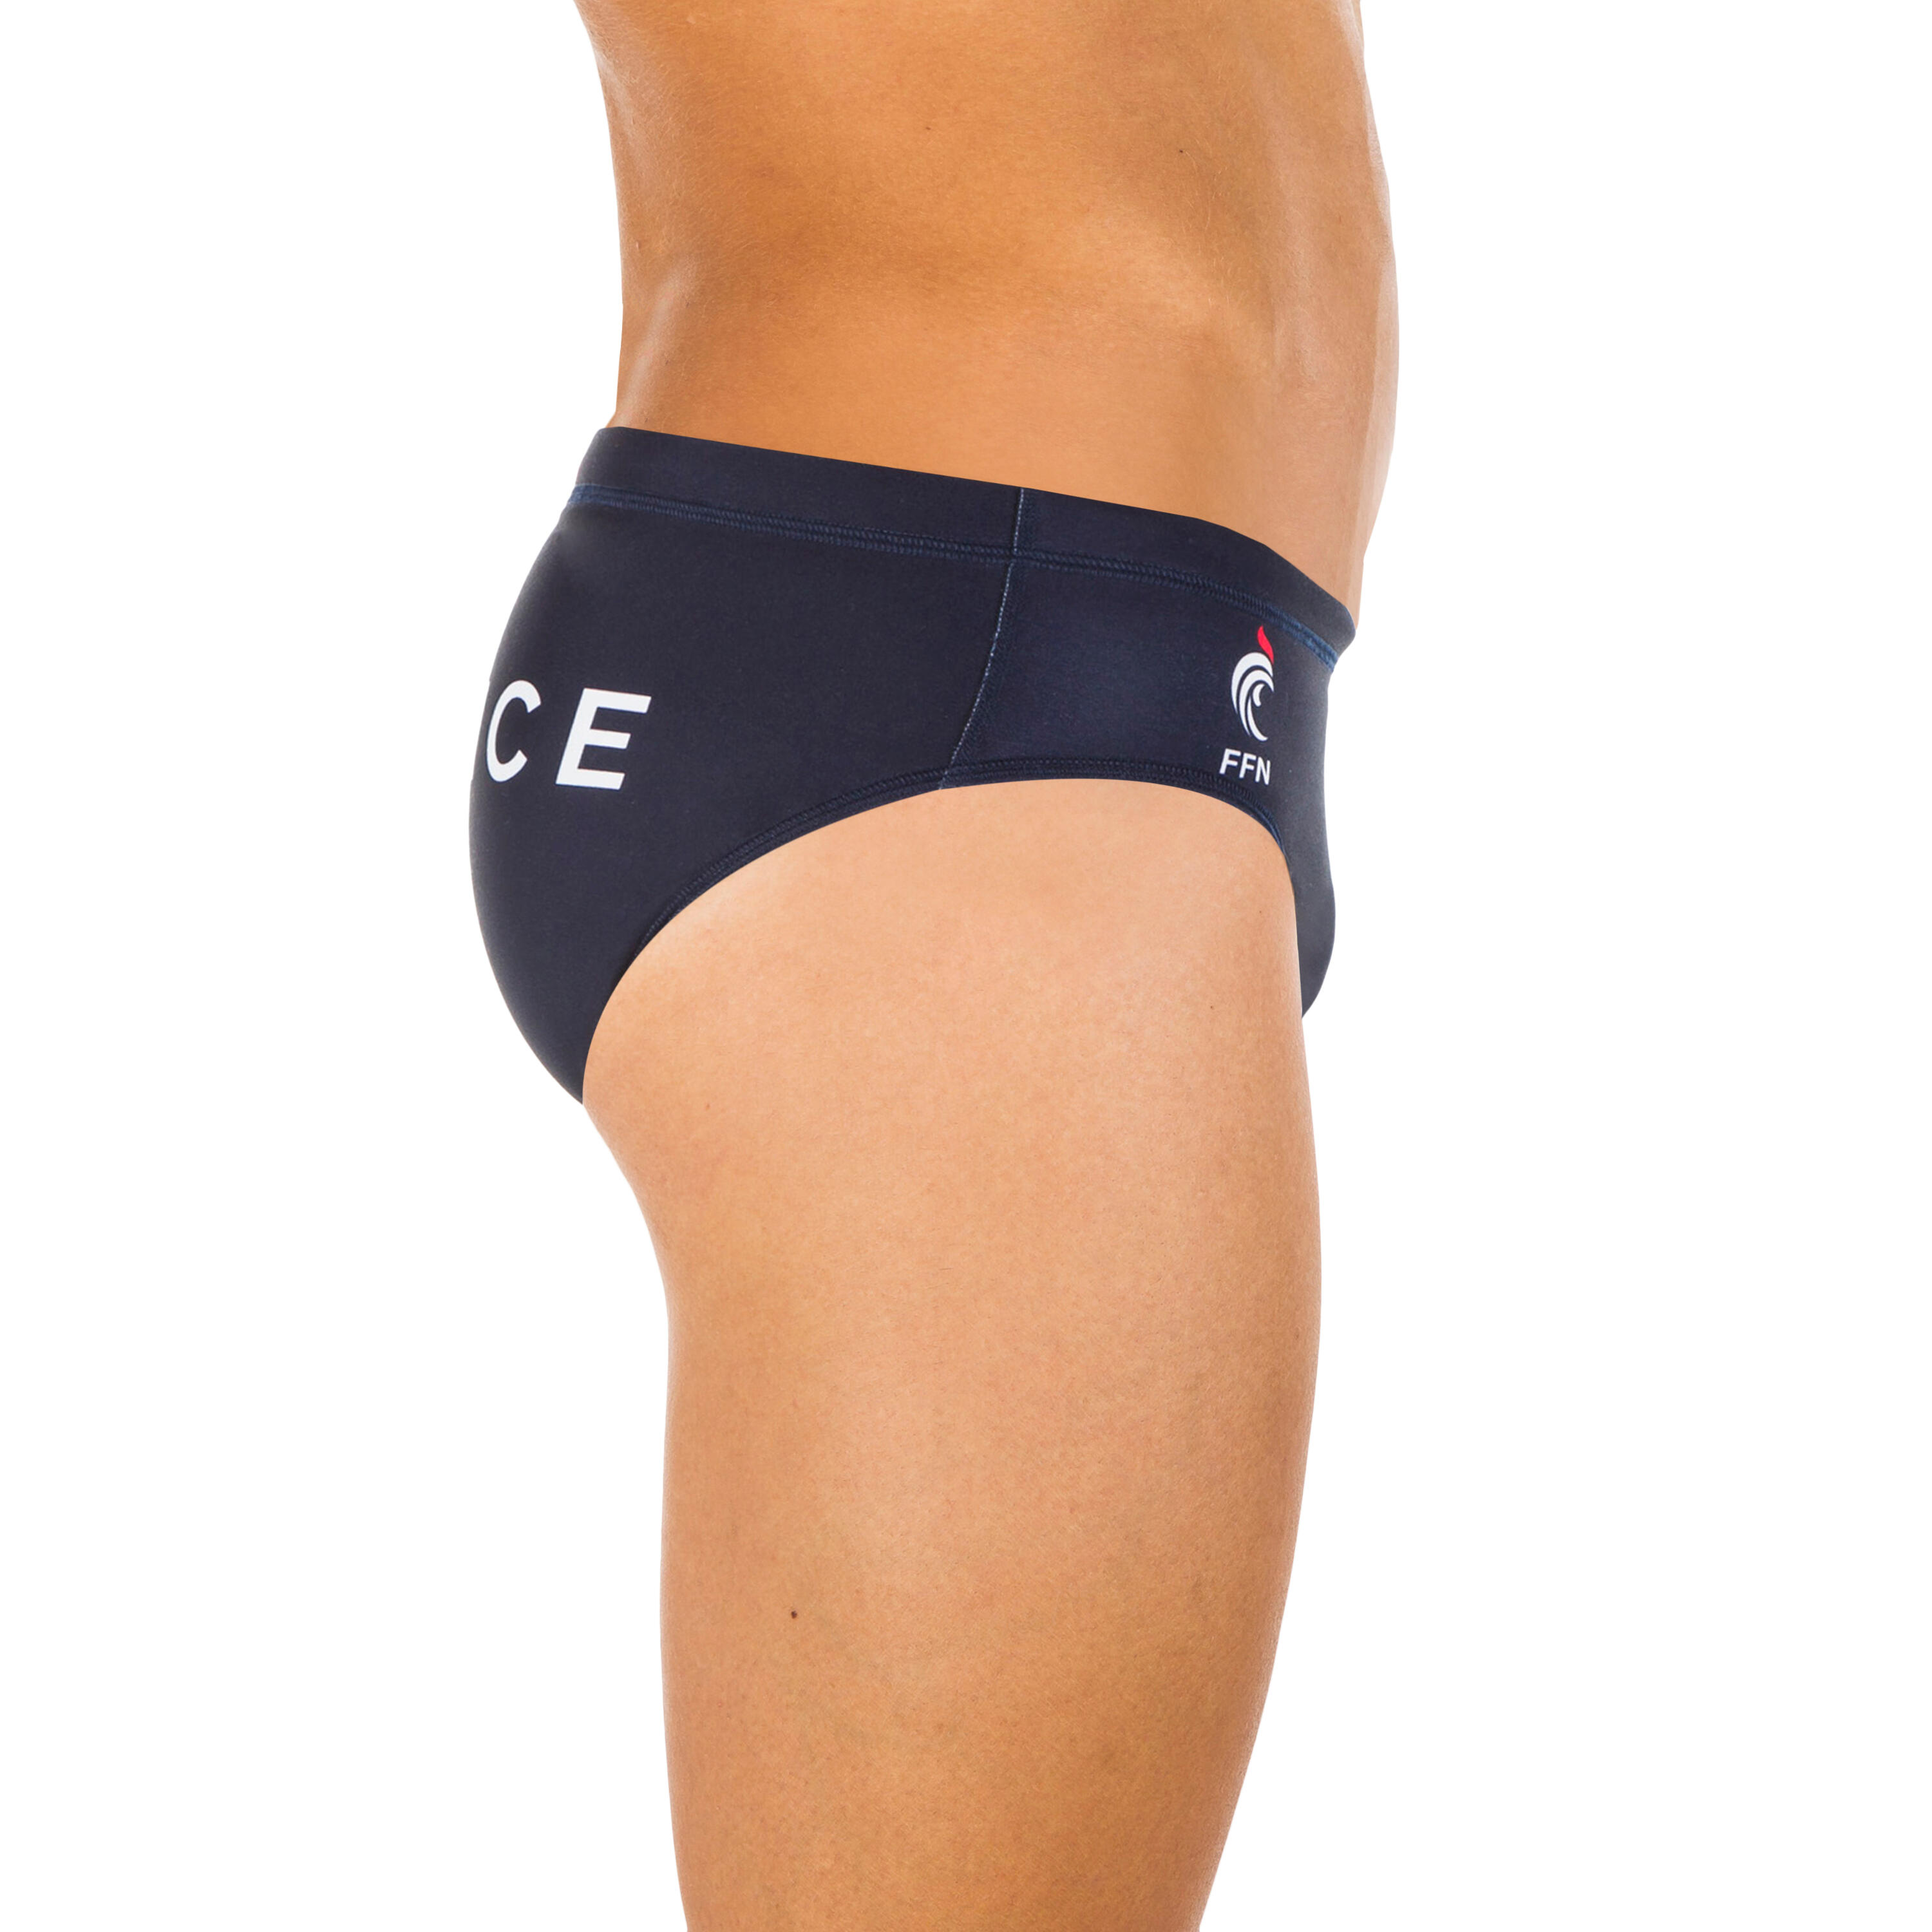 MEN'S WATER POLO SWIMMING BRIEFS - OFFICIAL FRANCE 4/5